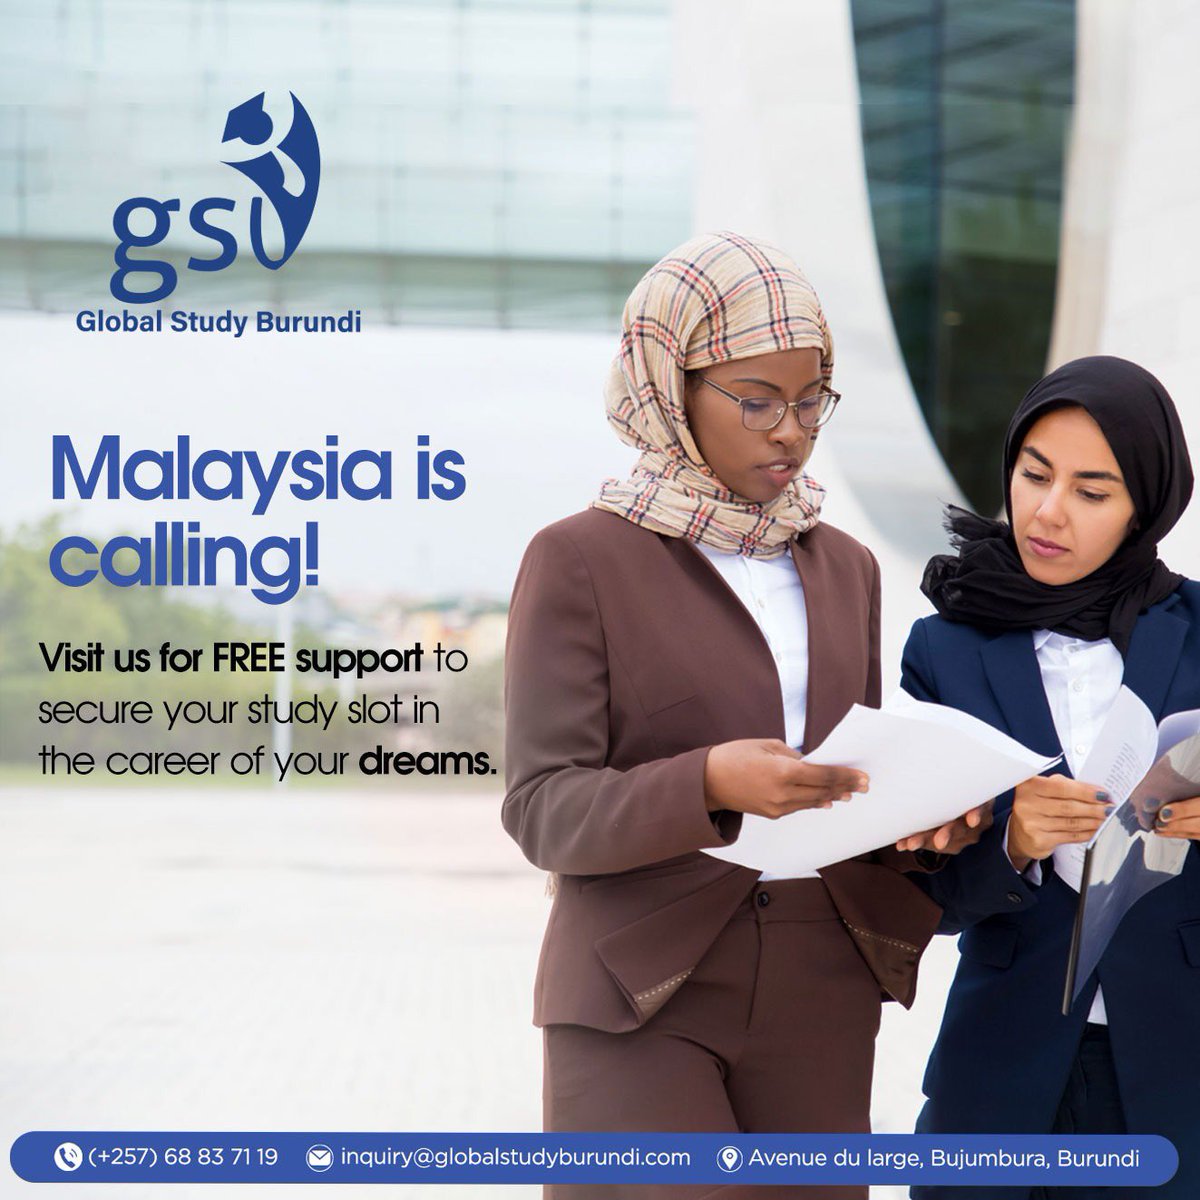 If your dream is to touch down in Malaysia for your study dreams, you are capable hands with us!

Get in touch for free support via +257 68 83 71 19.

#GSBurundi #StudyInMalaysia #UniLife #University #Malaysia #FRIDAY #FridayFeeling